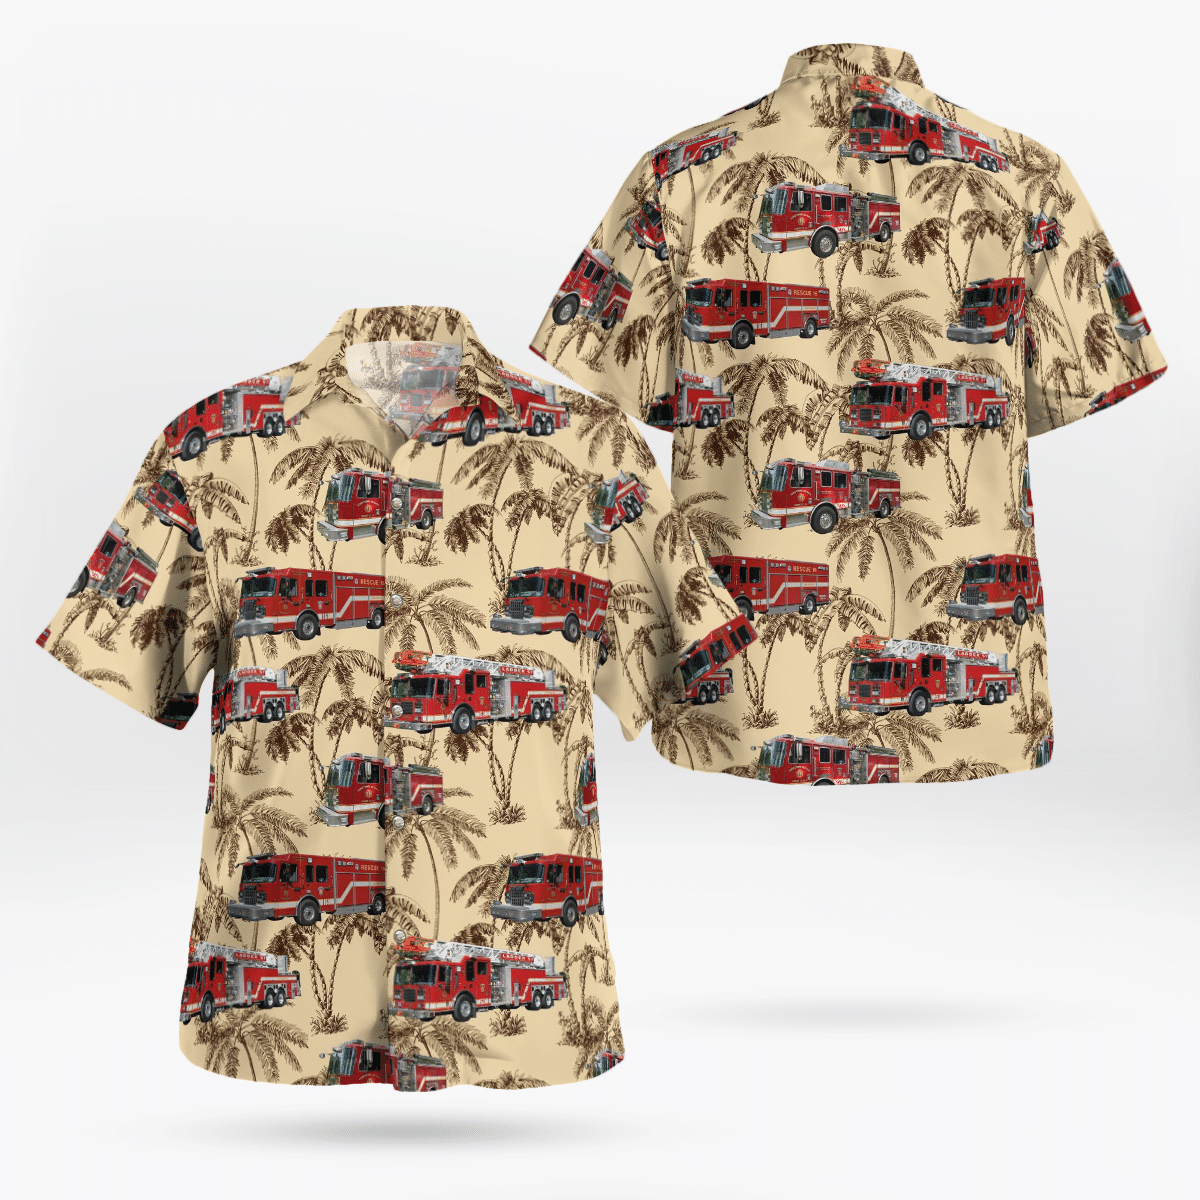 If you want to be noticed, wear These Trendy Hawaiian Shirt 74